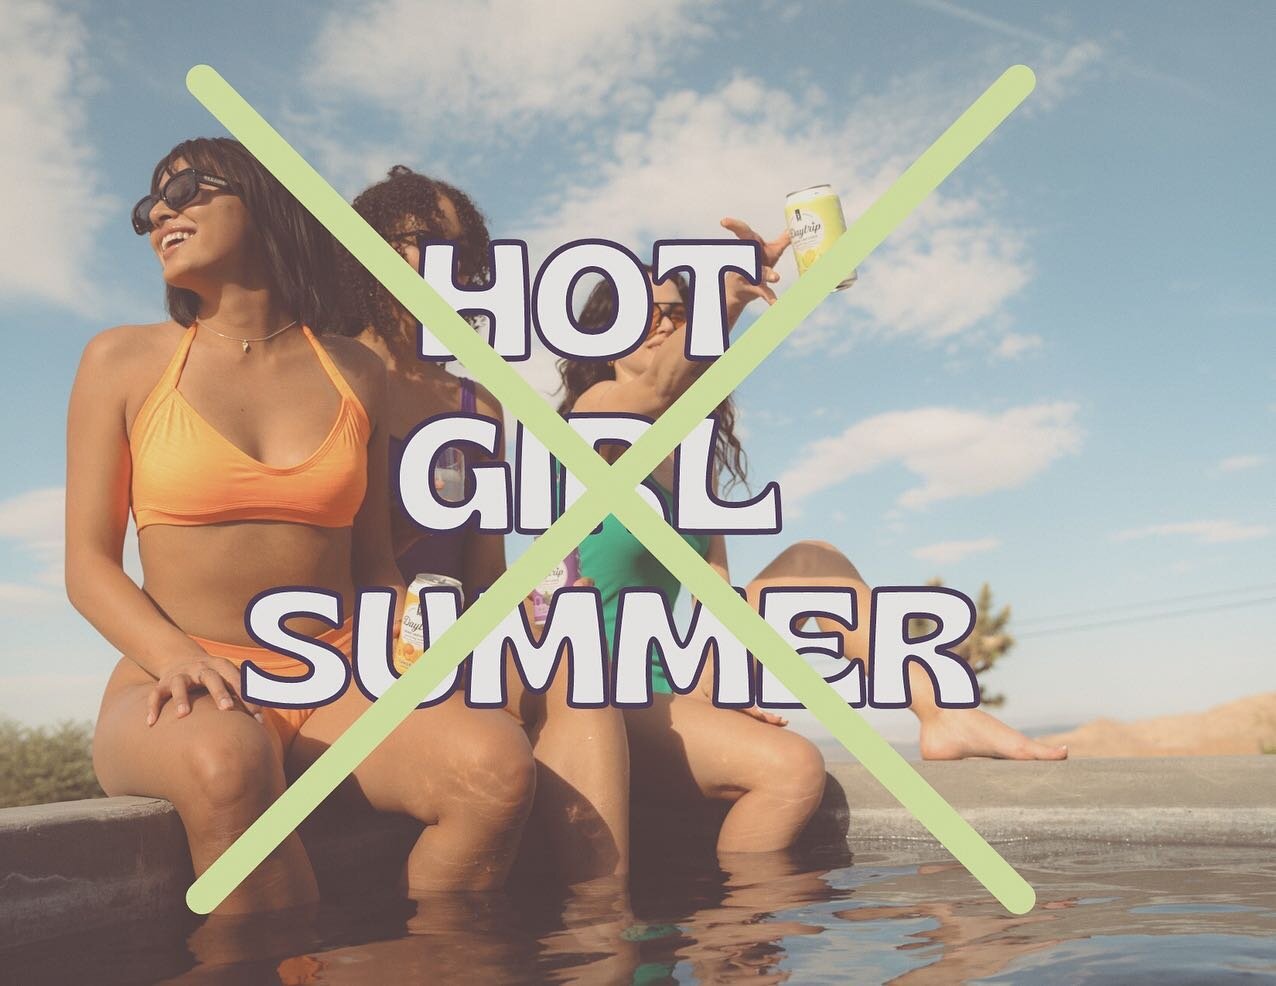 At Daytrip, we believe happier humans are healthier humans. 

Swipe over to see how we&rsquo;re celebrating hot girl summer -  on our terms 😎

#GoOnaDaytrip #HappyHumanSummer